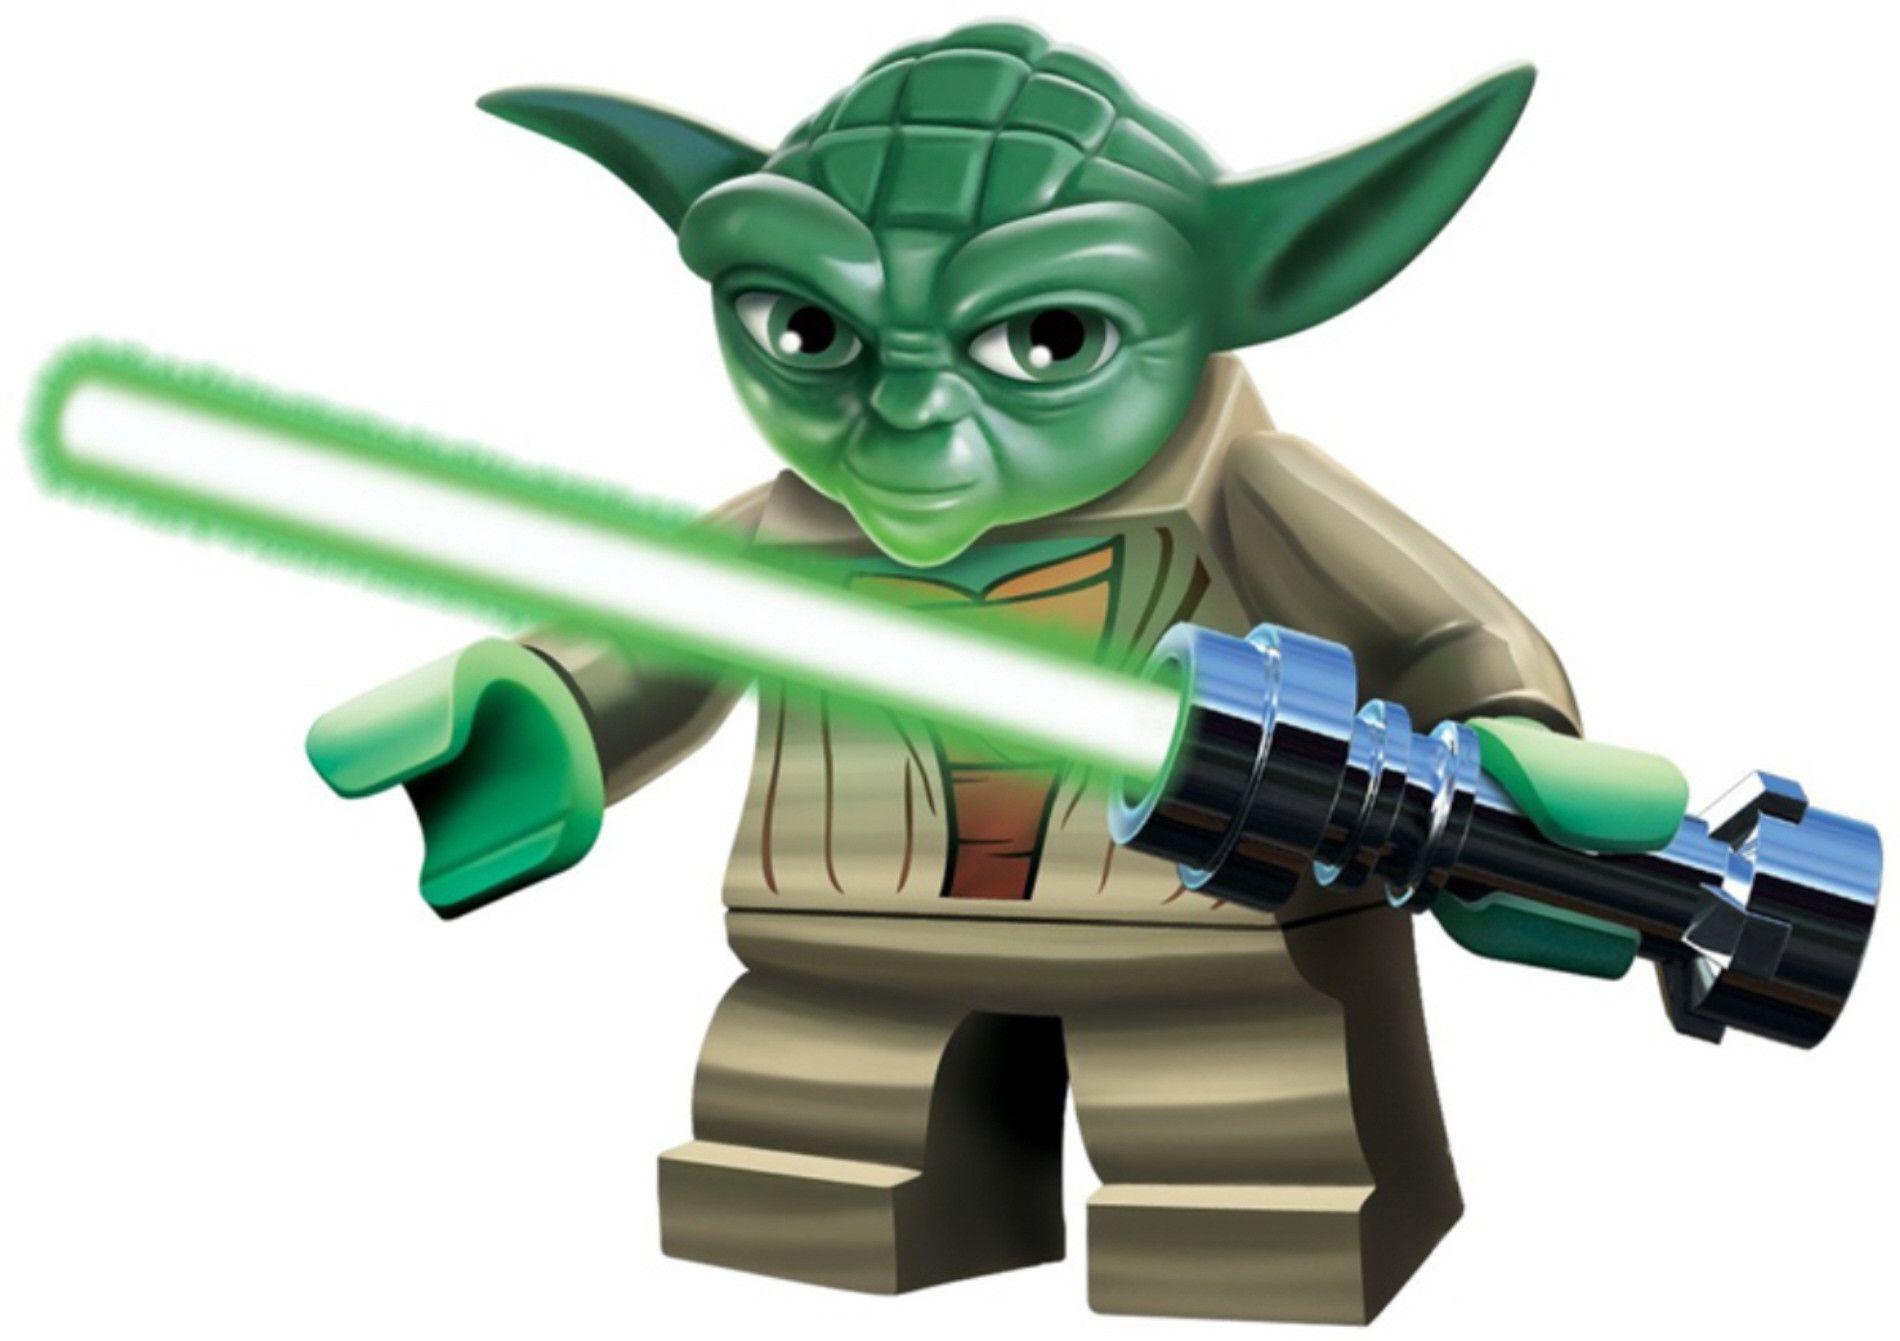 Lego Star Wars Yoda Other Wallpaper 1900x1341 px Free Download